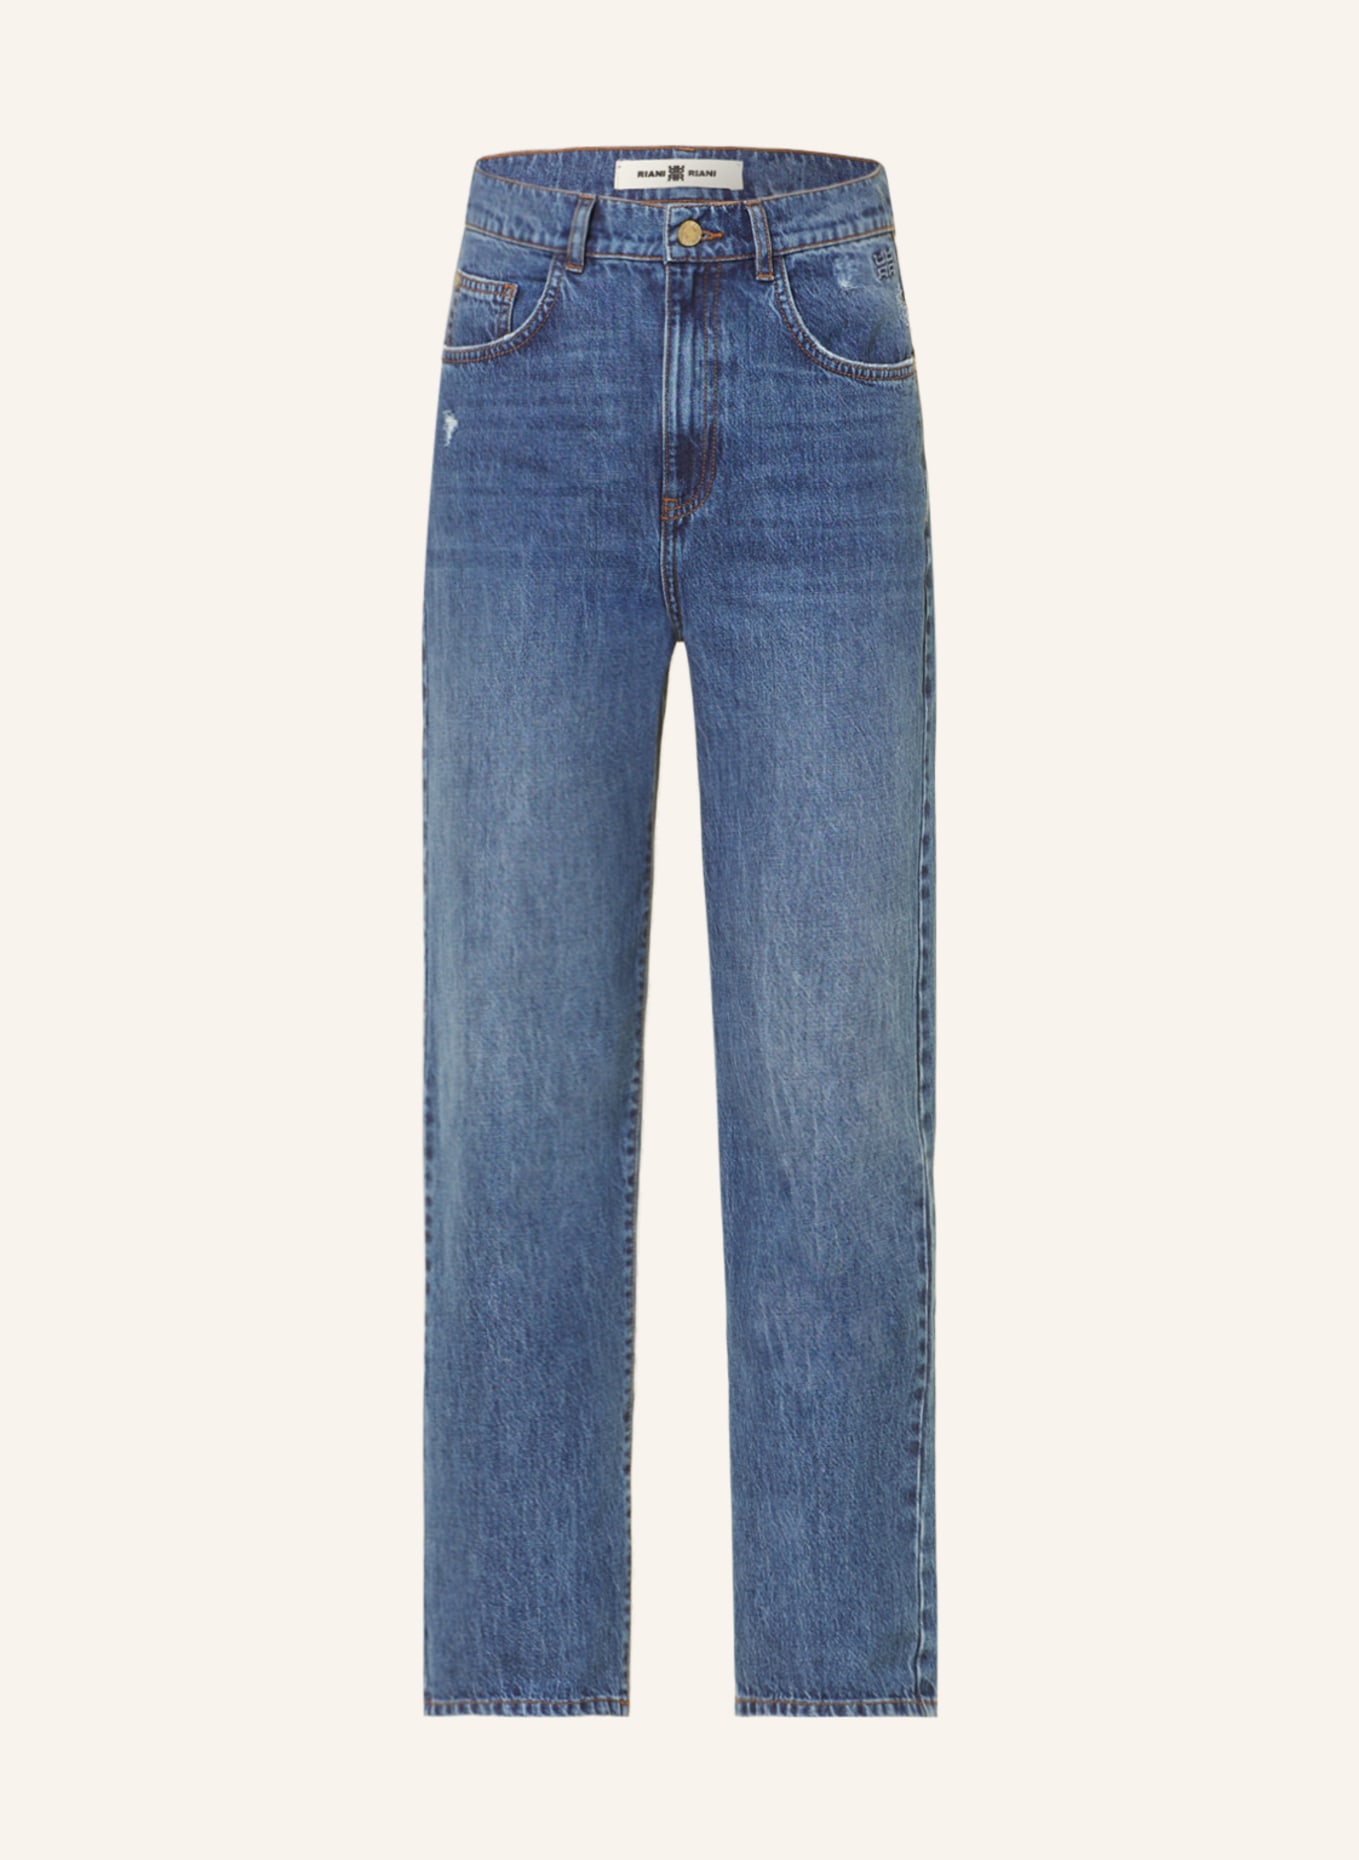 RIANI Straight Jeans, Farbe: 423 light authentic blue scratched (Bild 1)